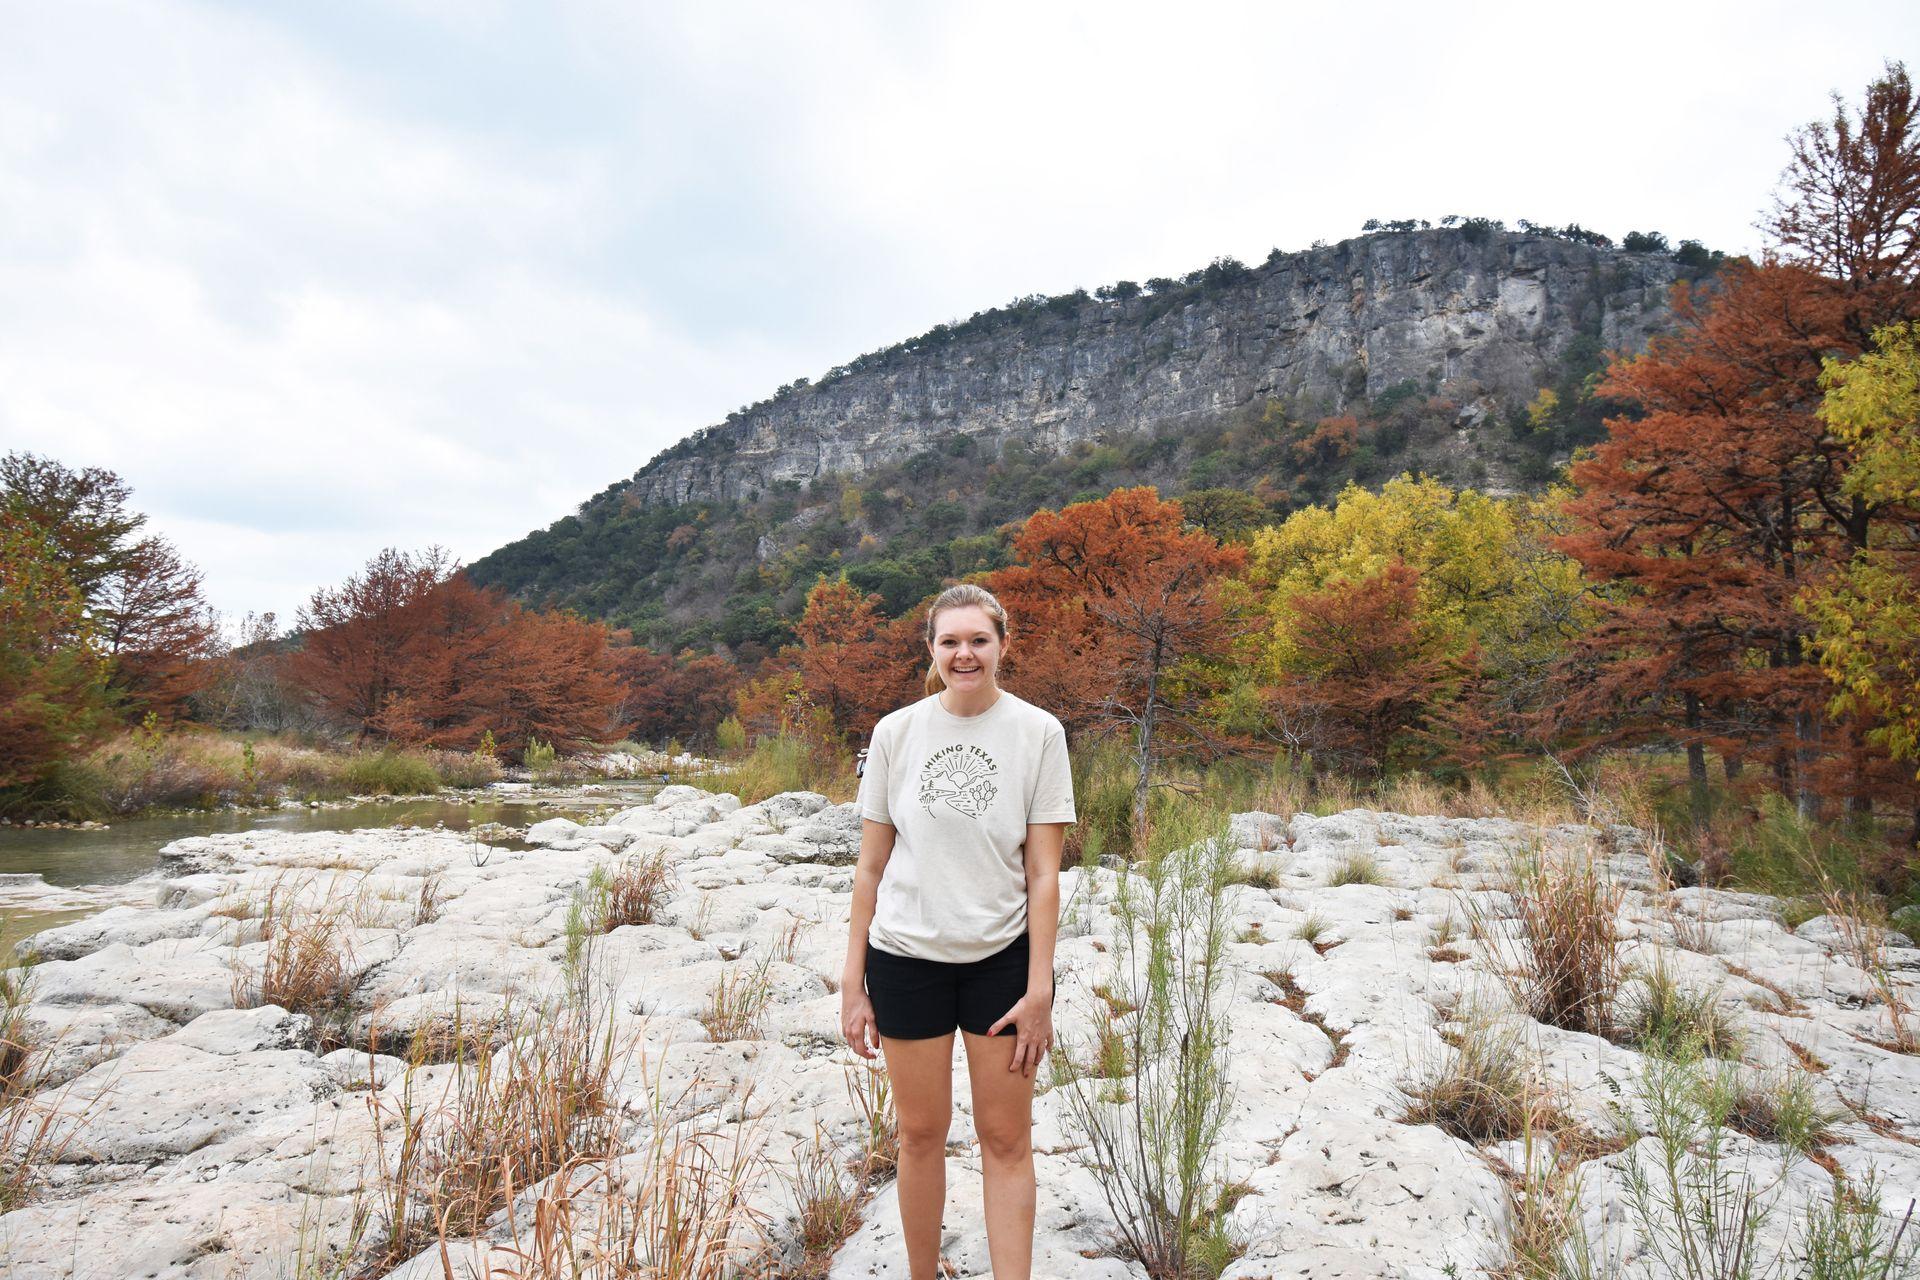 Lydia standing on rocks next to the Frio River with fall foliage in the background.